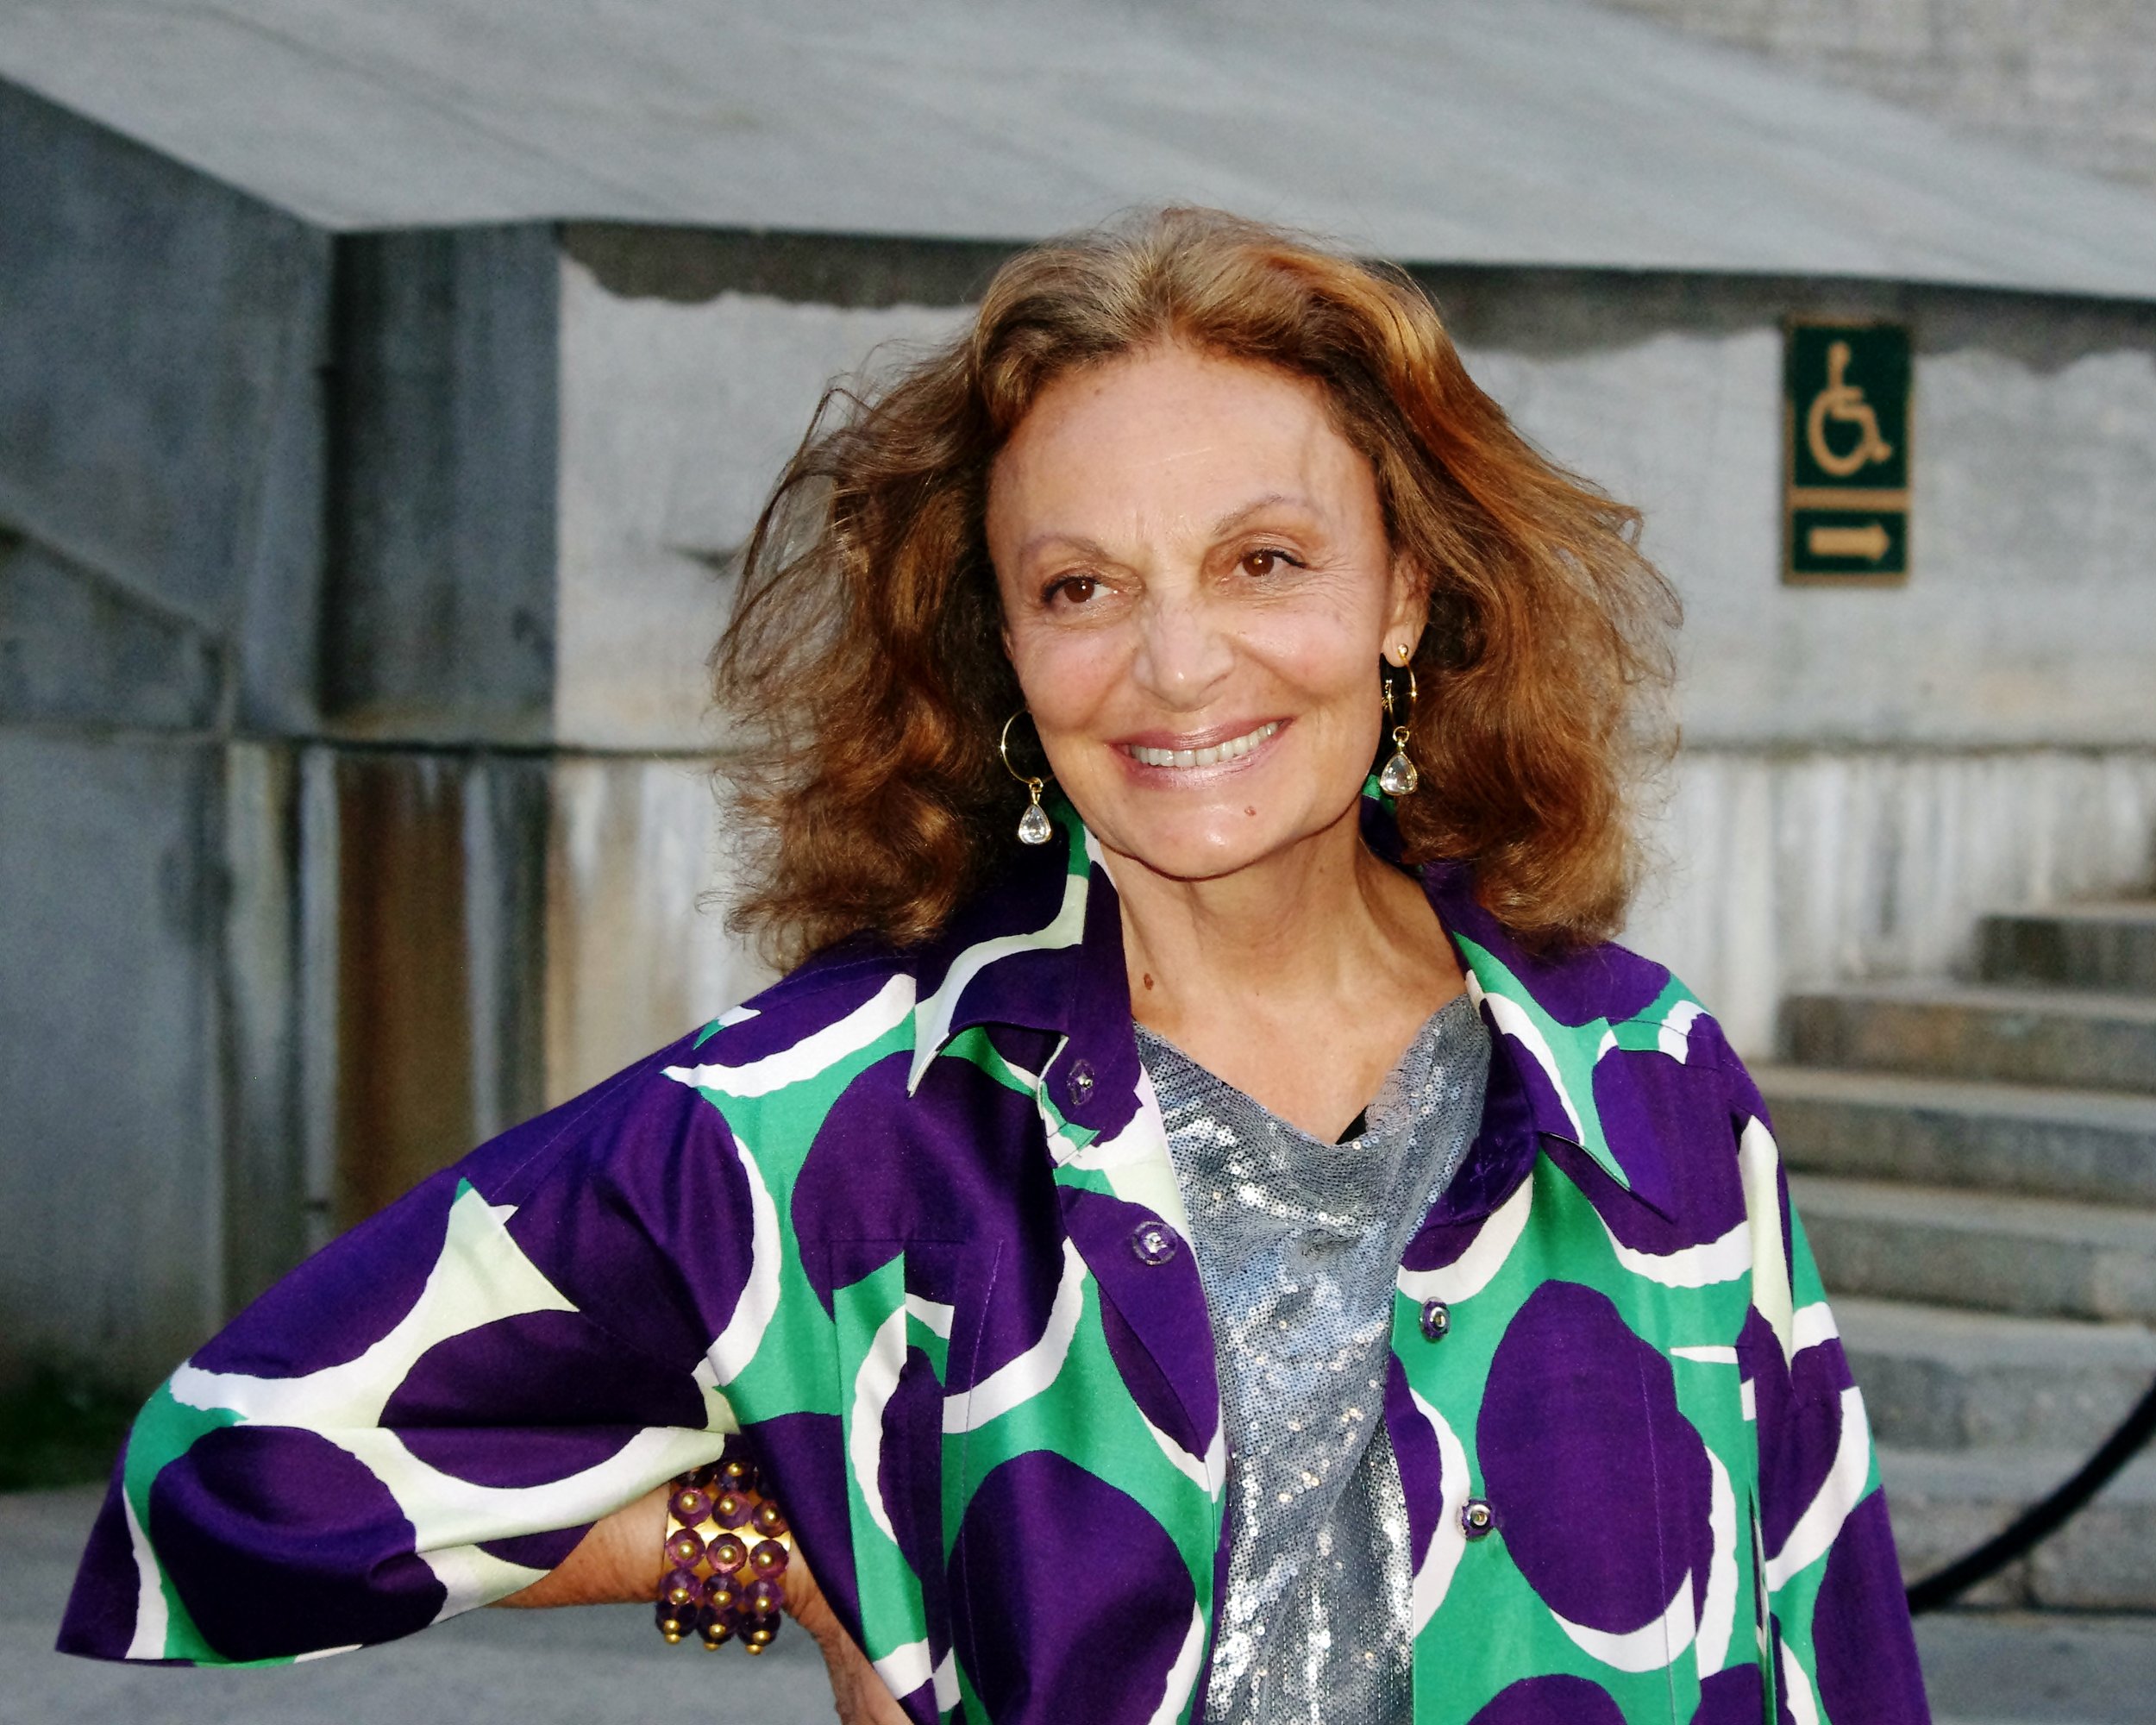 Diane von Furstenberg: Woman in Charge — NYC for FREE